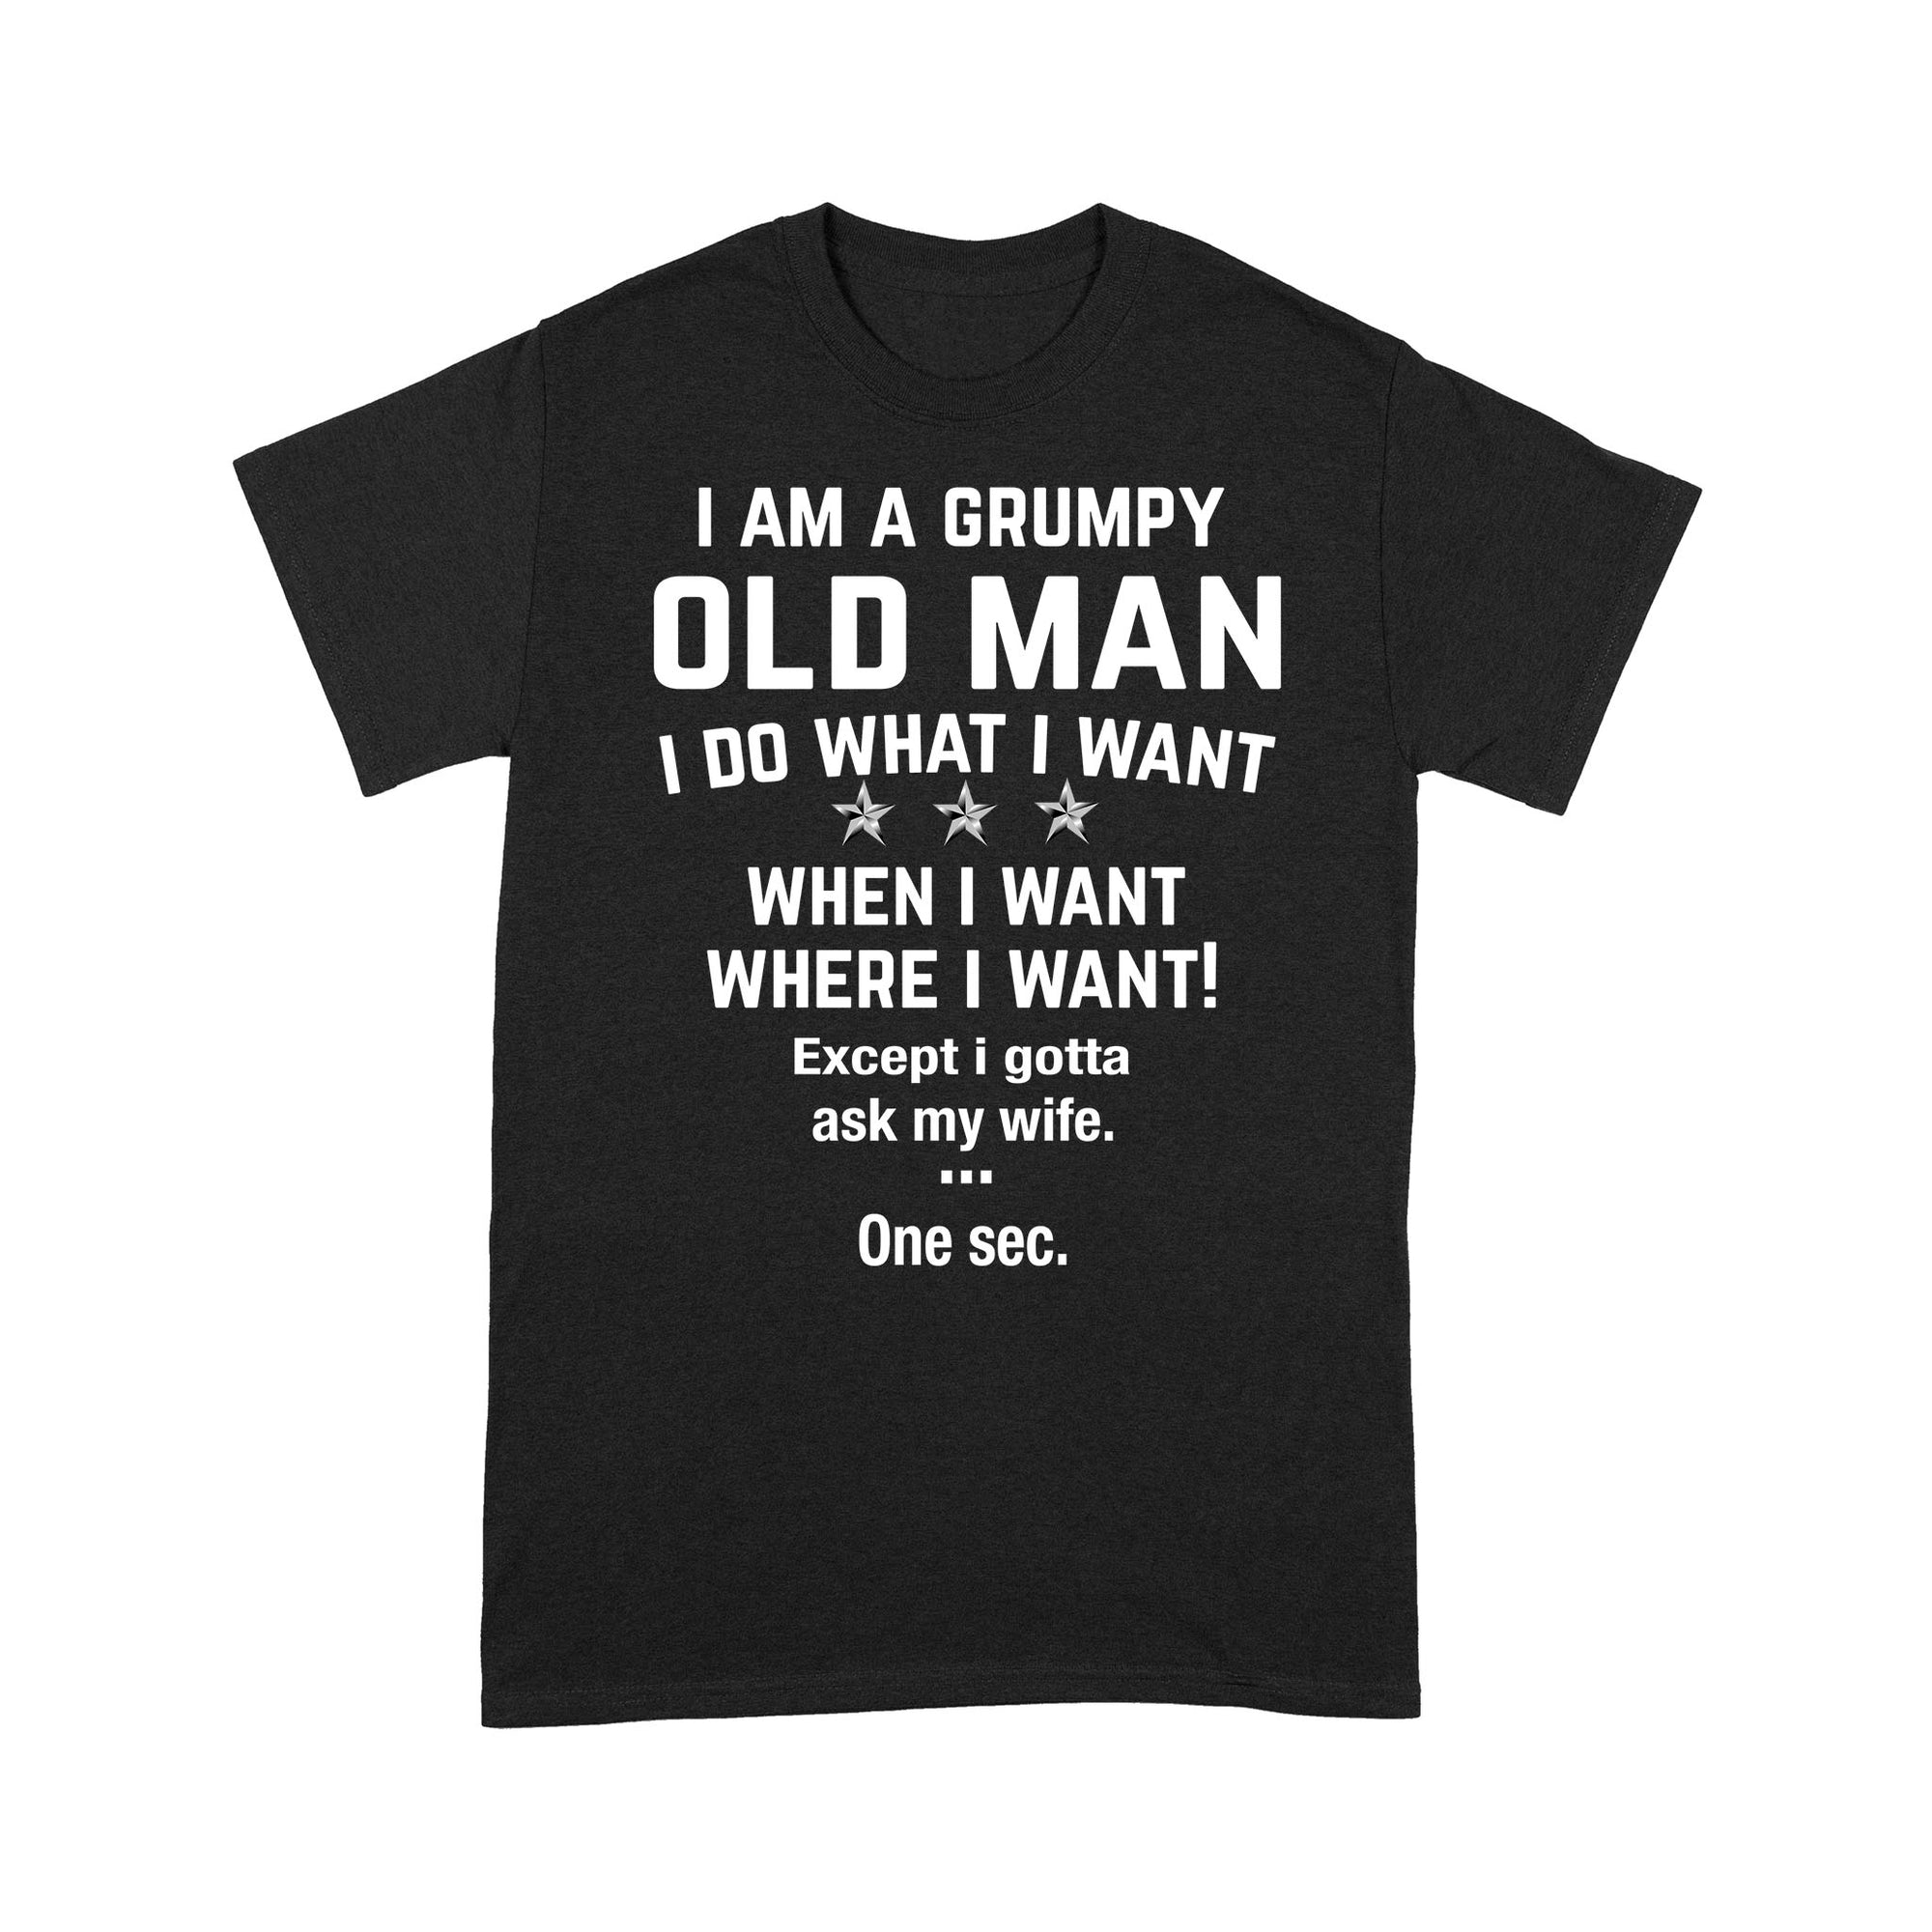 I Am A Grumpy Old Man I Do What I Want Except I Gotta Ask My Wife Funny Quotes Sayings Custom Graphic Design Gifts Ideas For Husband Dad Grandpa - Standard T-shirt